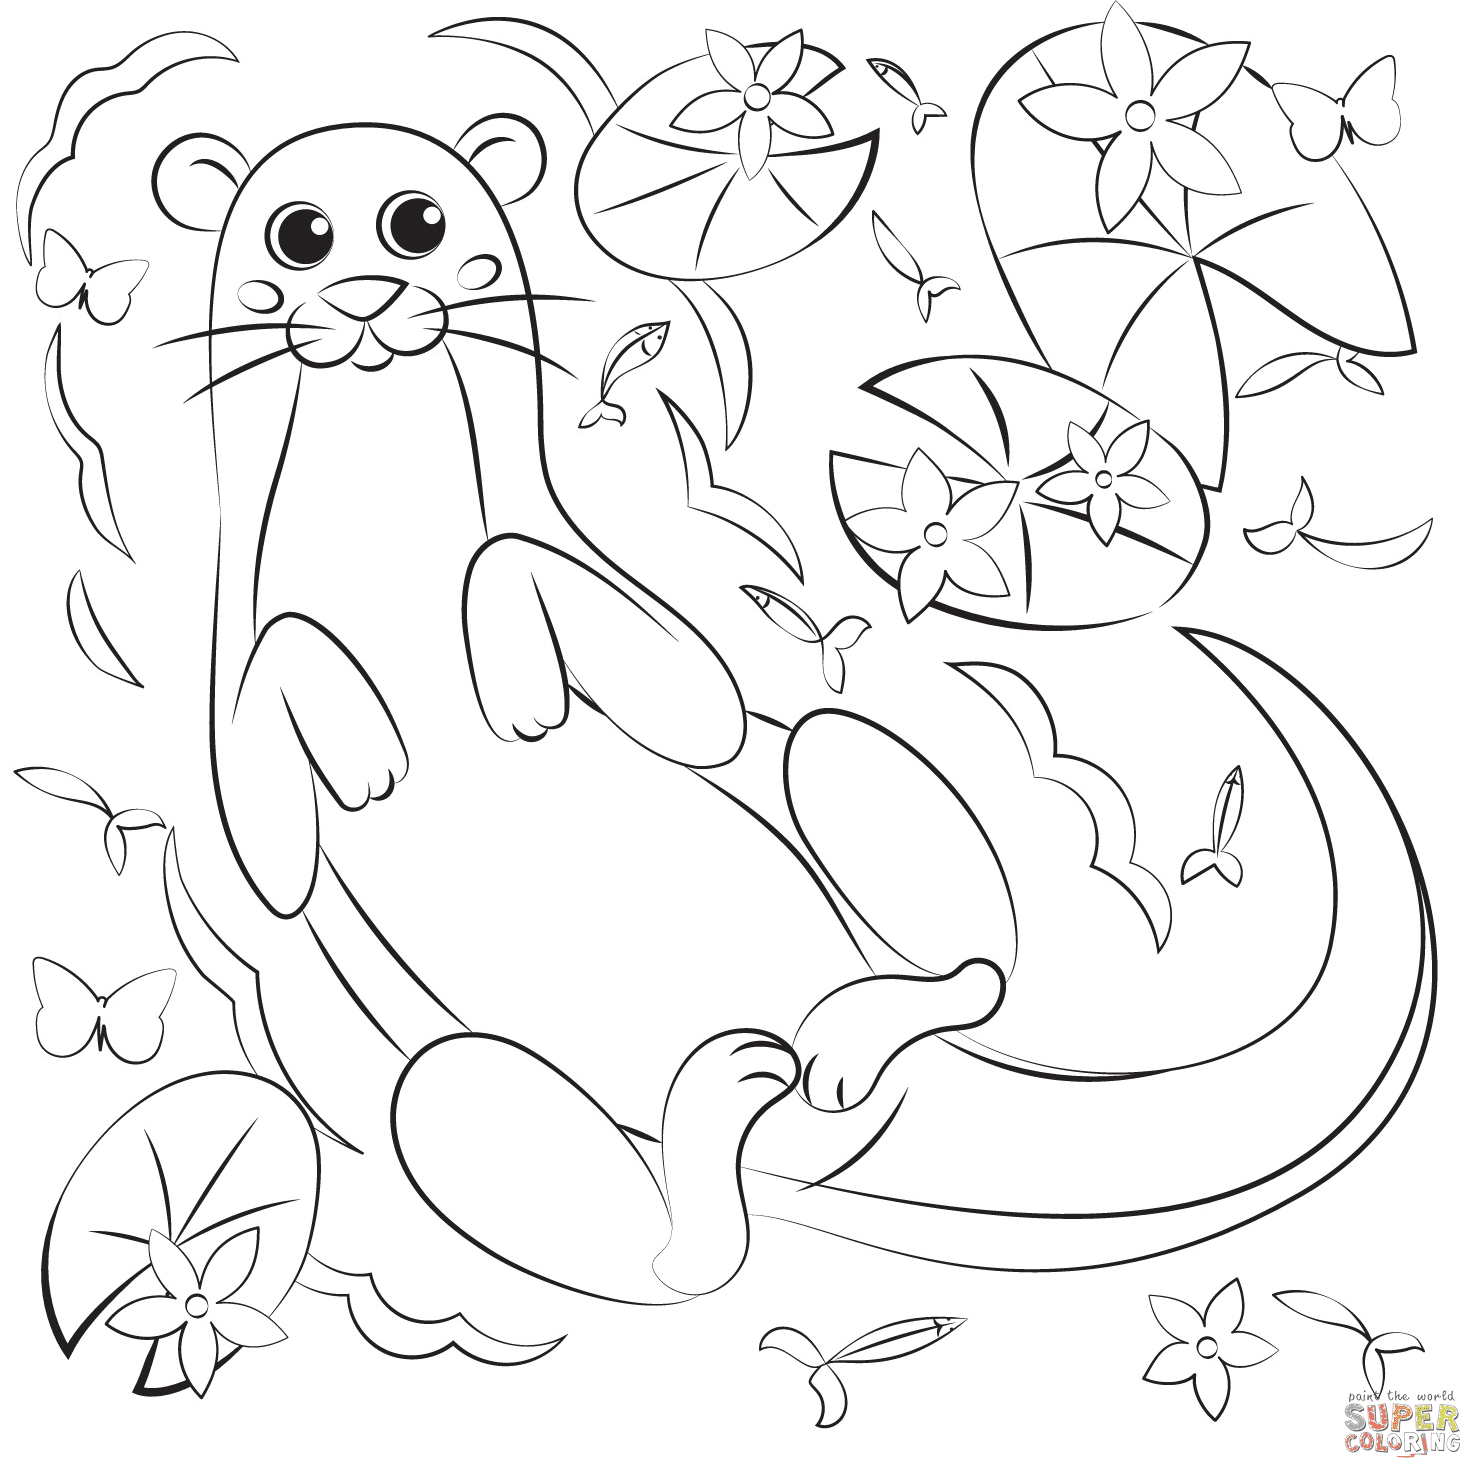 Otter Water Scene Coloring Page